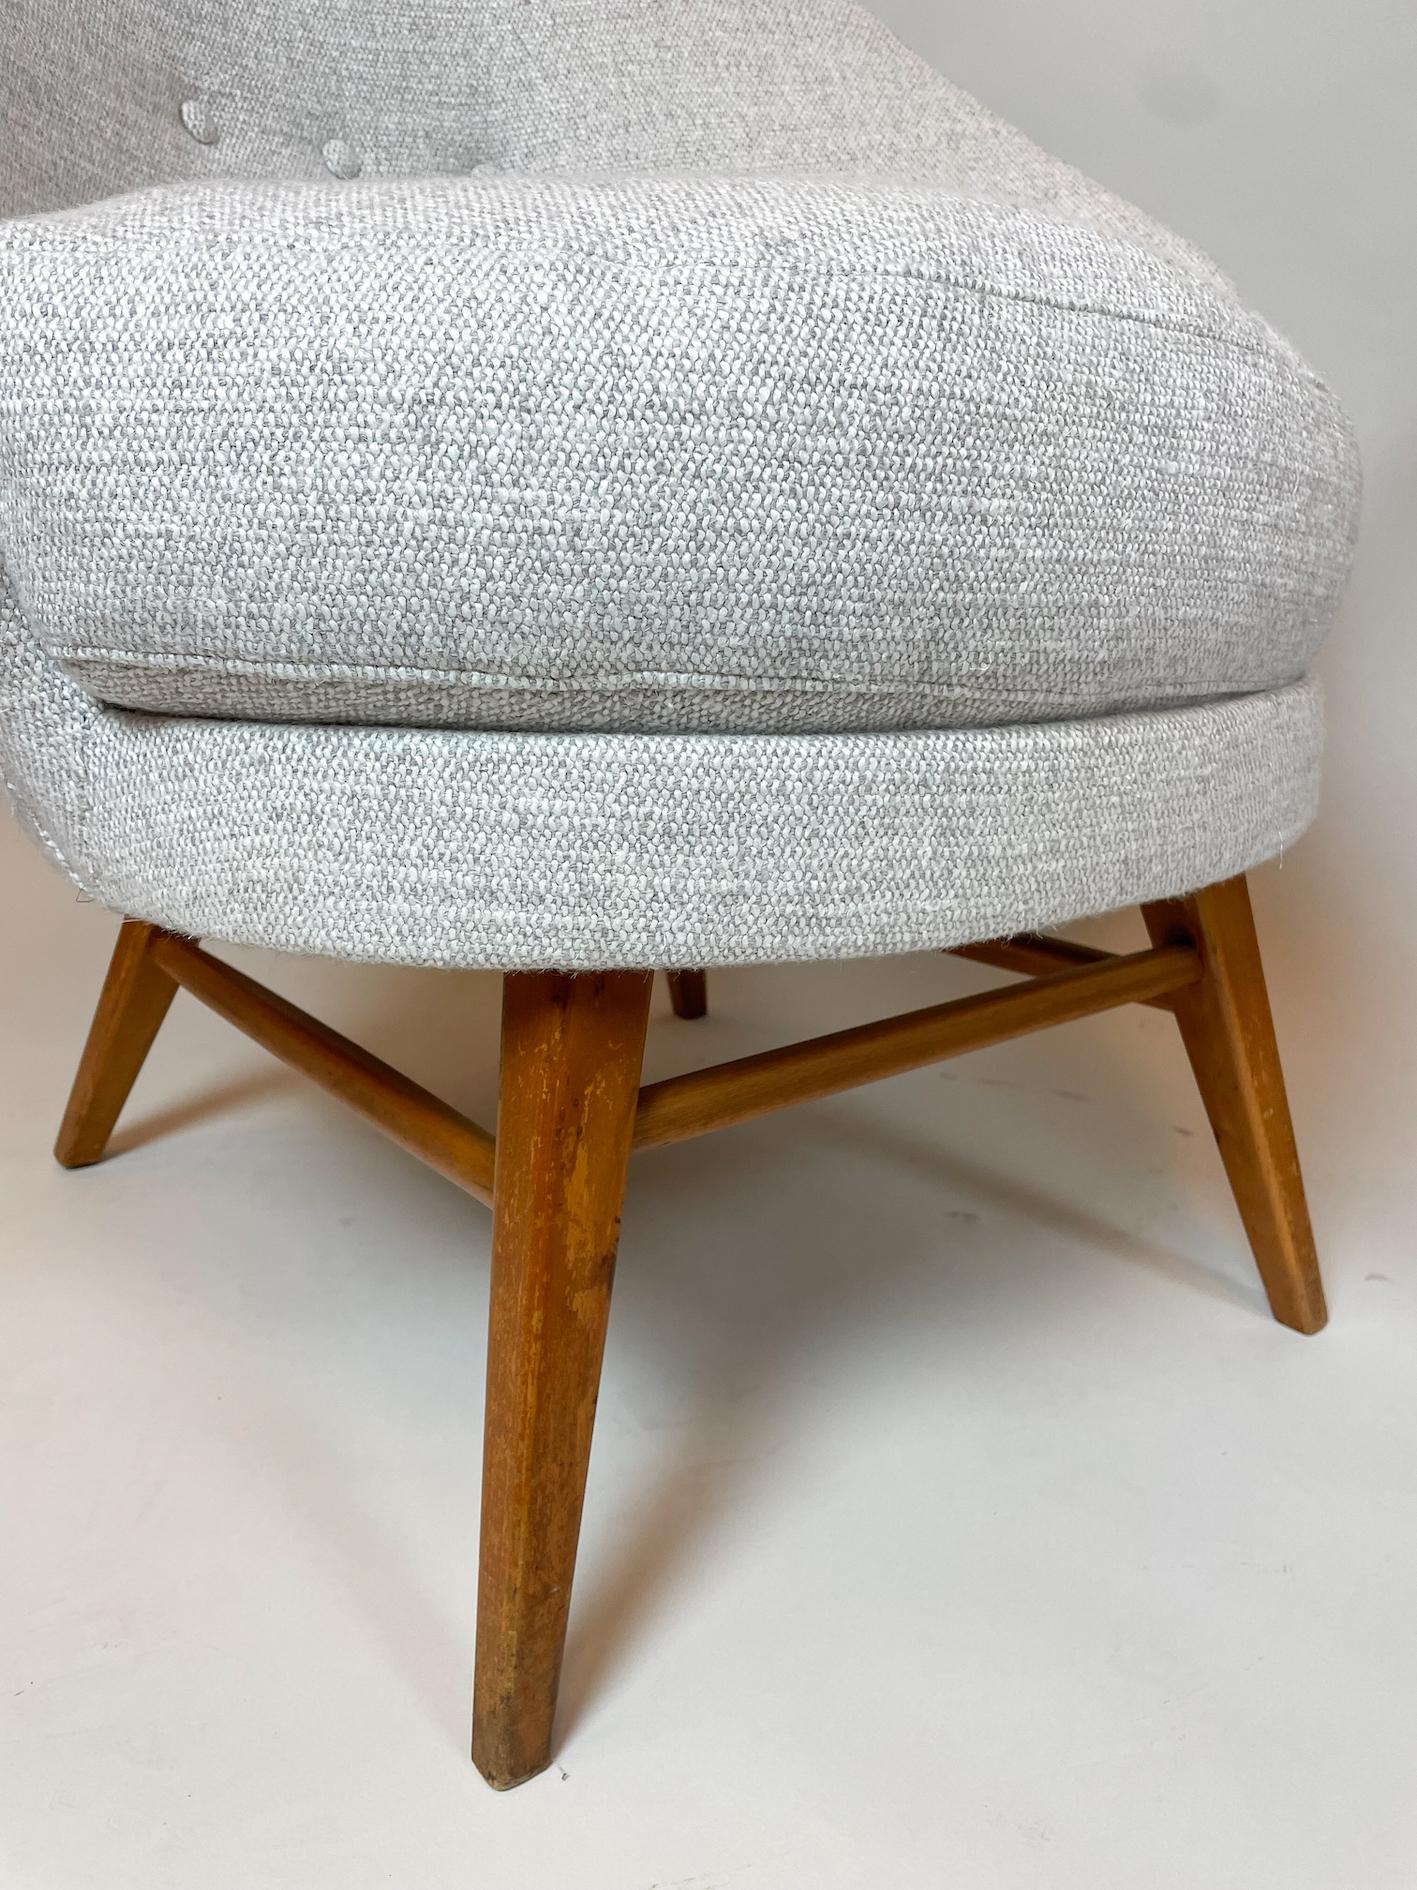 Mid-Century Modern Pair of Armchairs, Austro-Hungarian, 1960s - New Upholstery For Sale 1